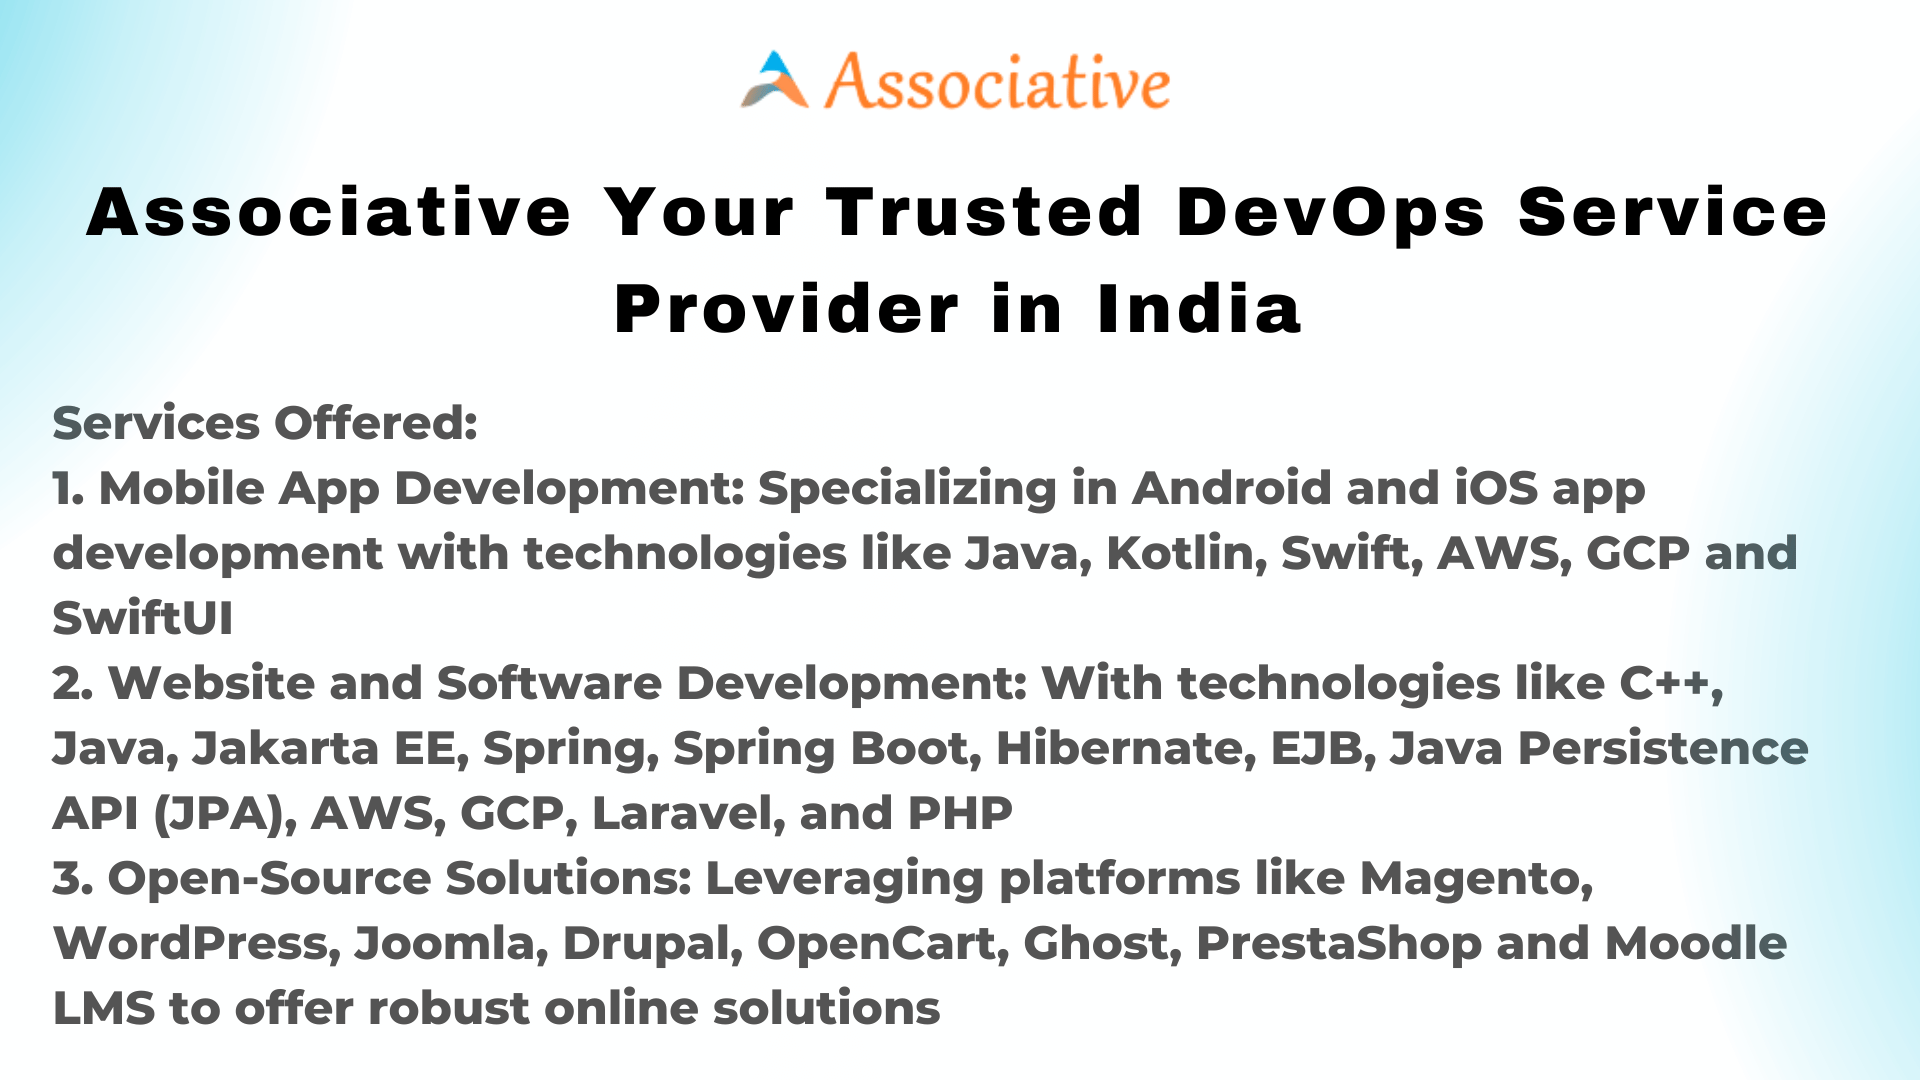 Associative Your Trusted DevOps Service Provider in India